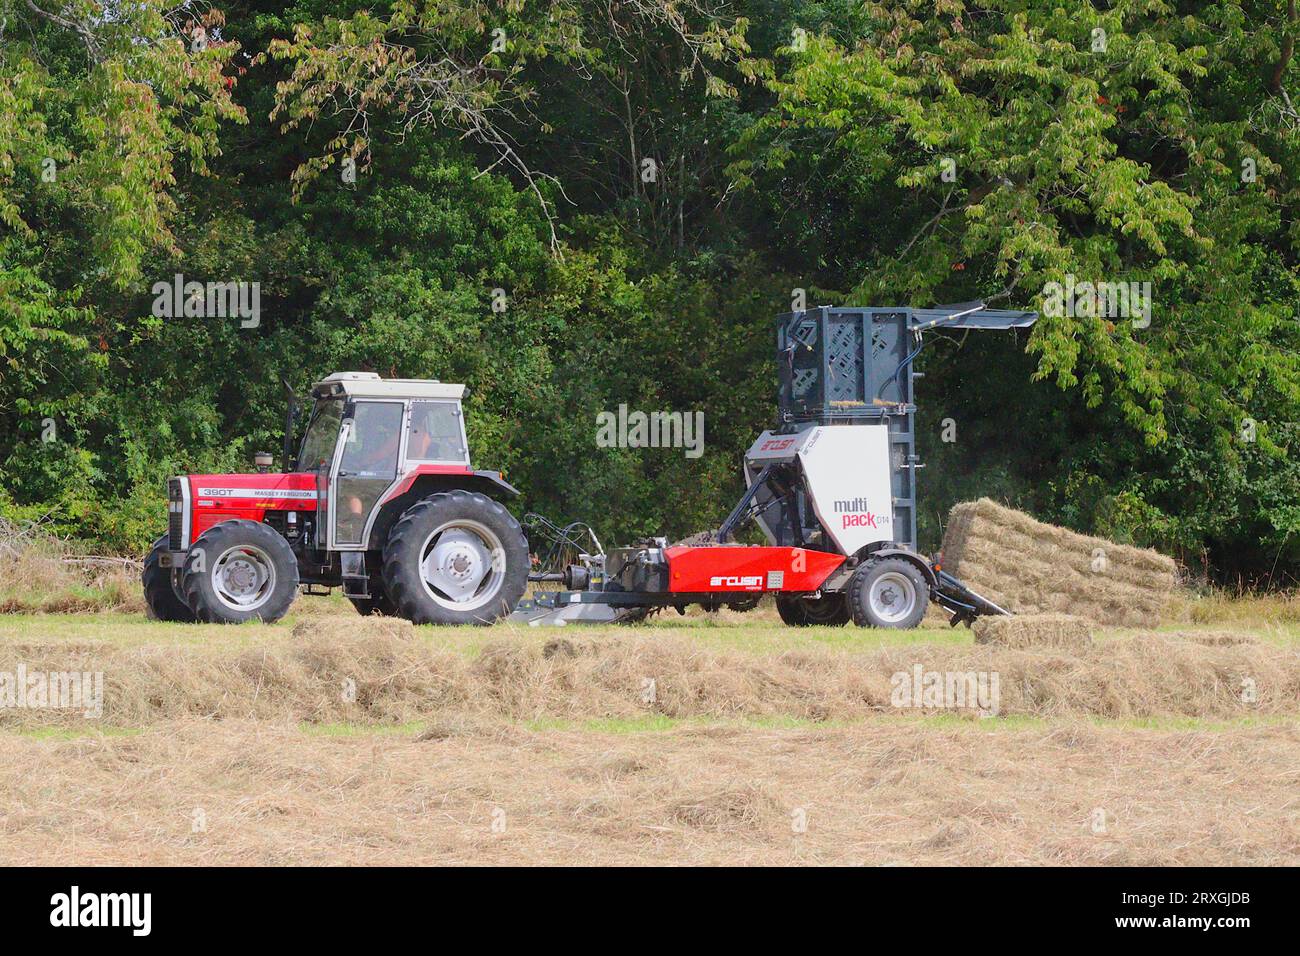 Massey Ferguson 390T tractor hitched to an Arcusin D14 multi pack baler which loads 14 single rectangular bales, in to one large bound bale. Stock Photo